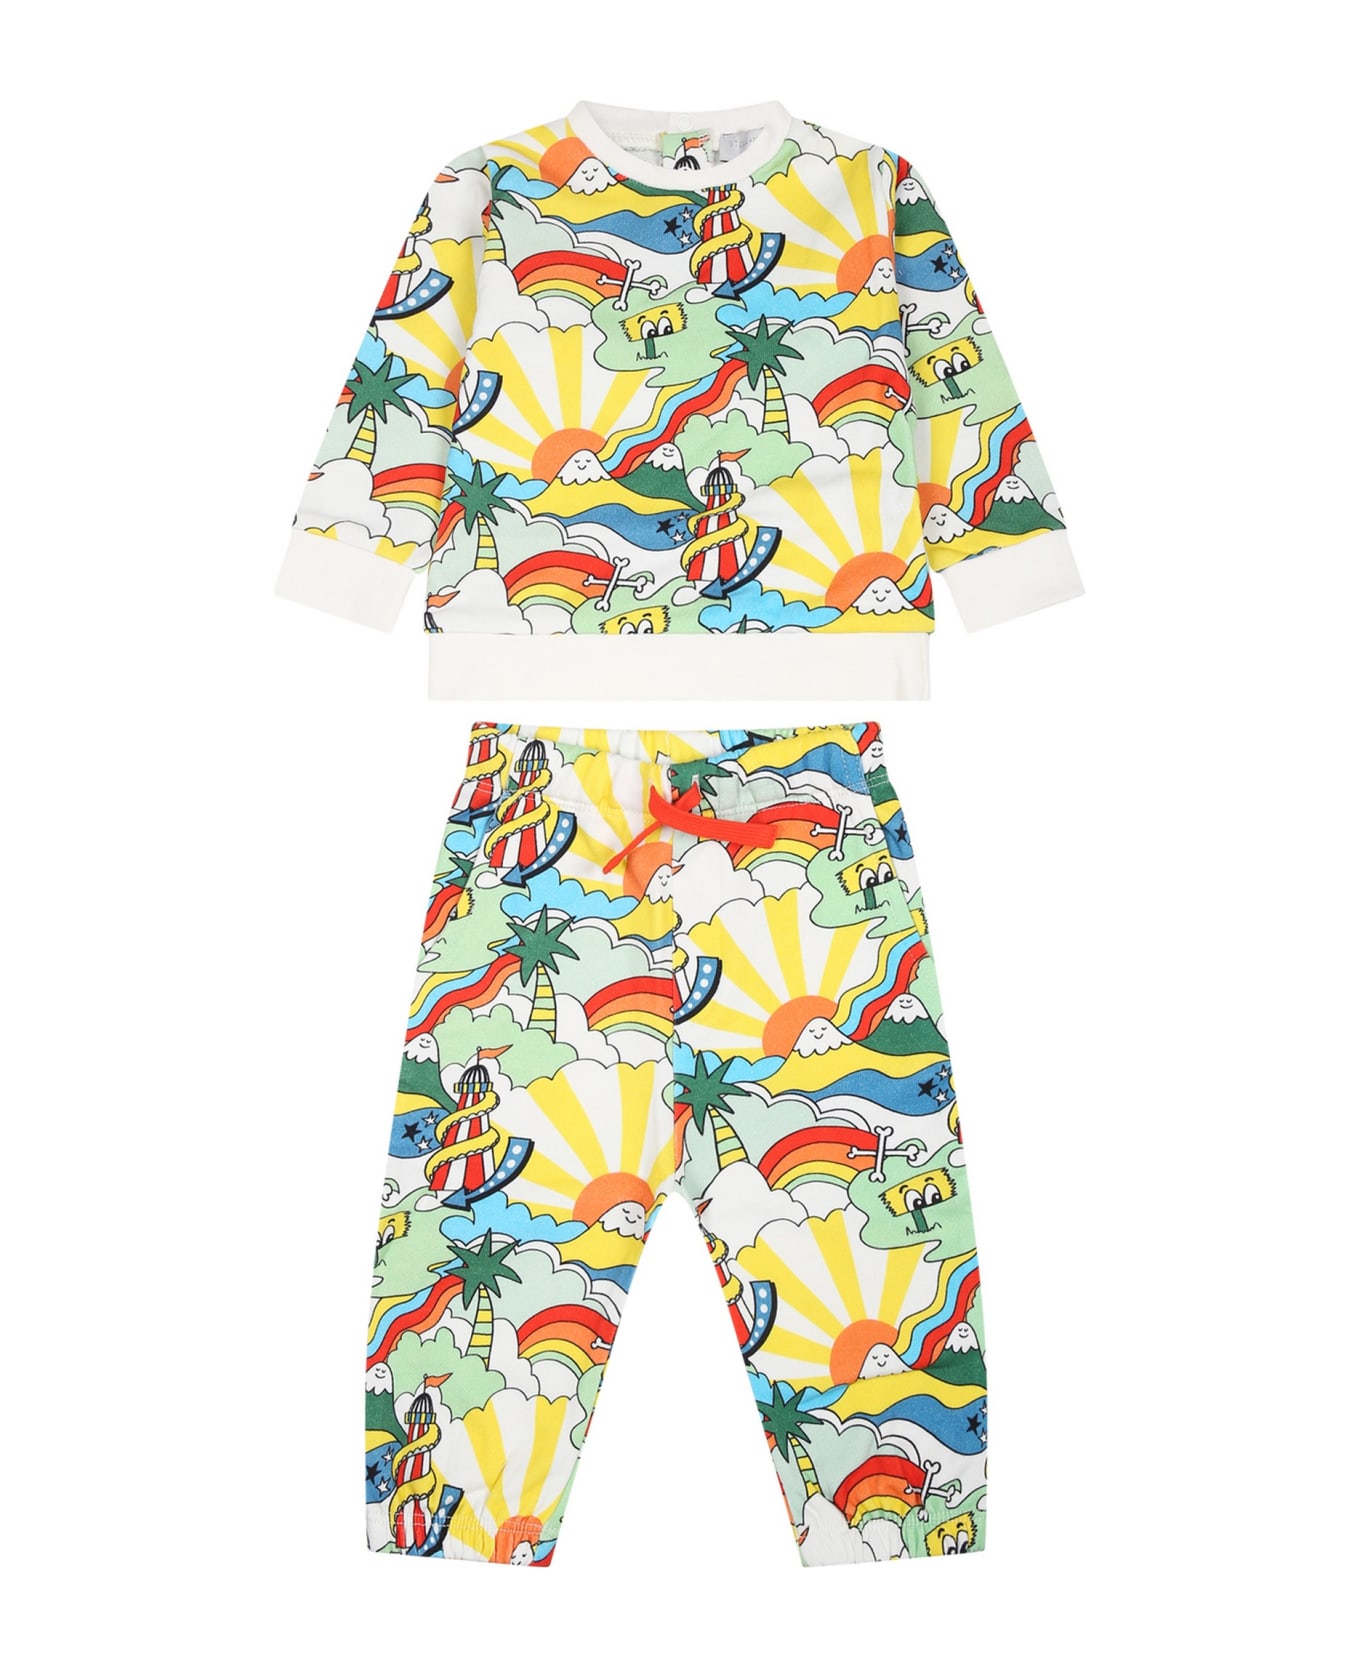 Stella McCartney Kids White Suit For Baby Boy With Print - Multicolor